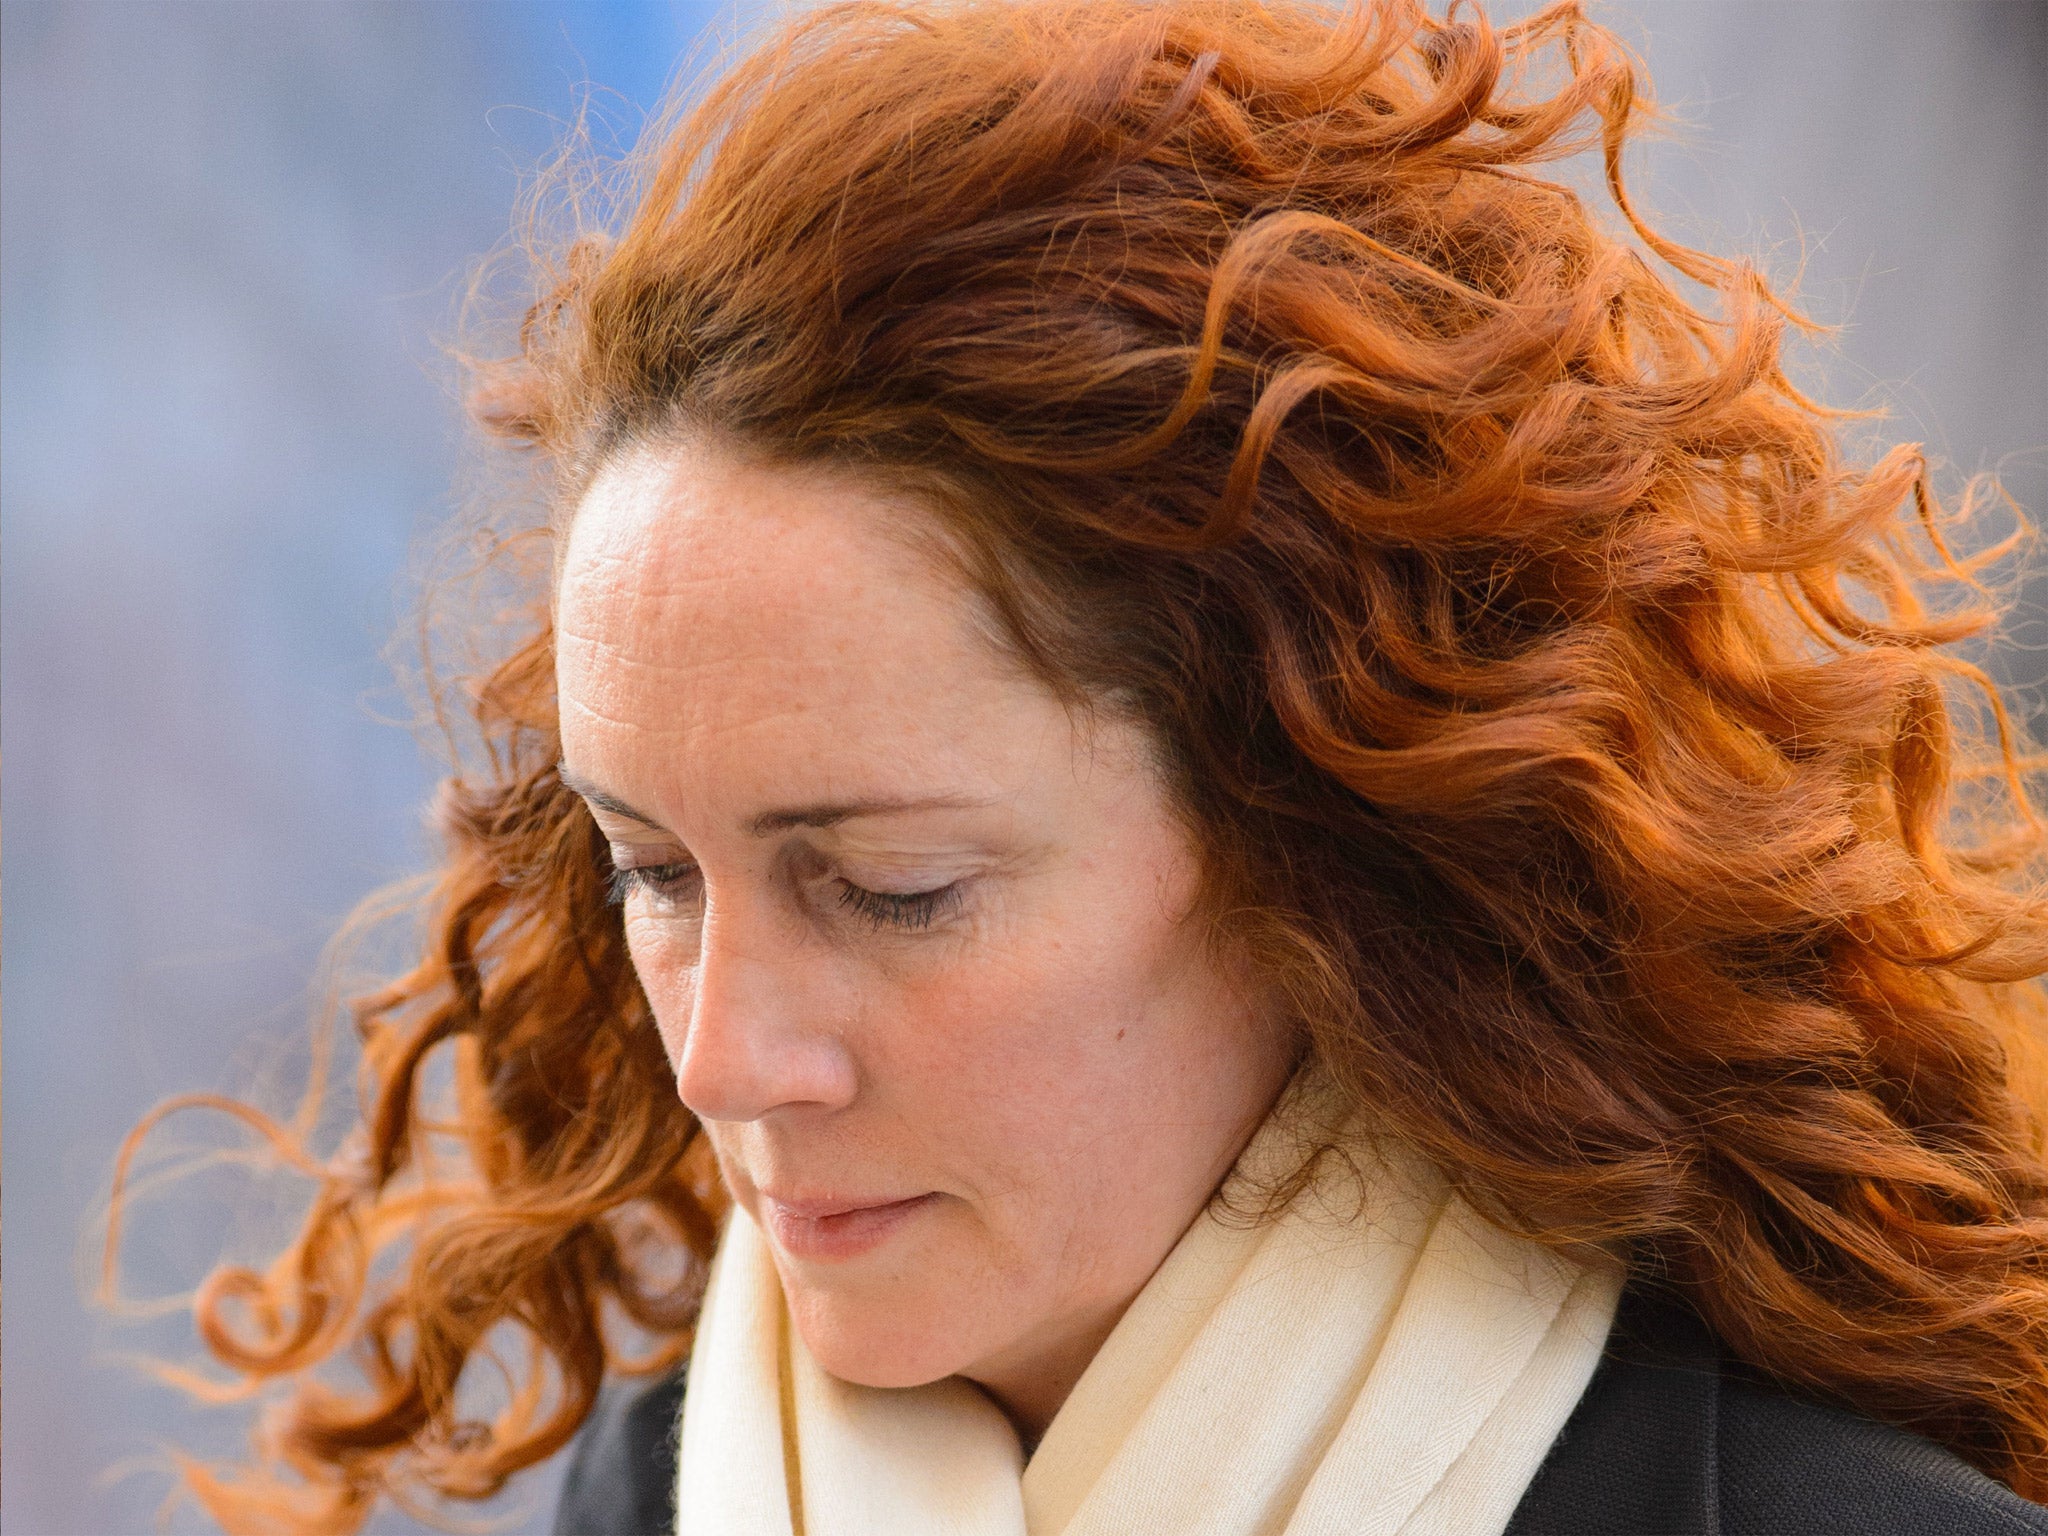 Former News International chief executive Rebekah Brooks arrives at the Old Bailey